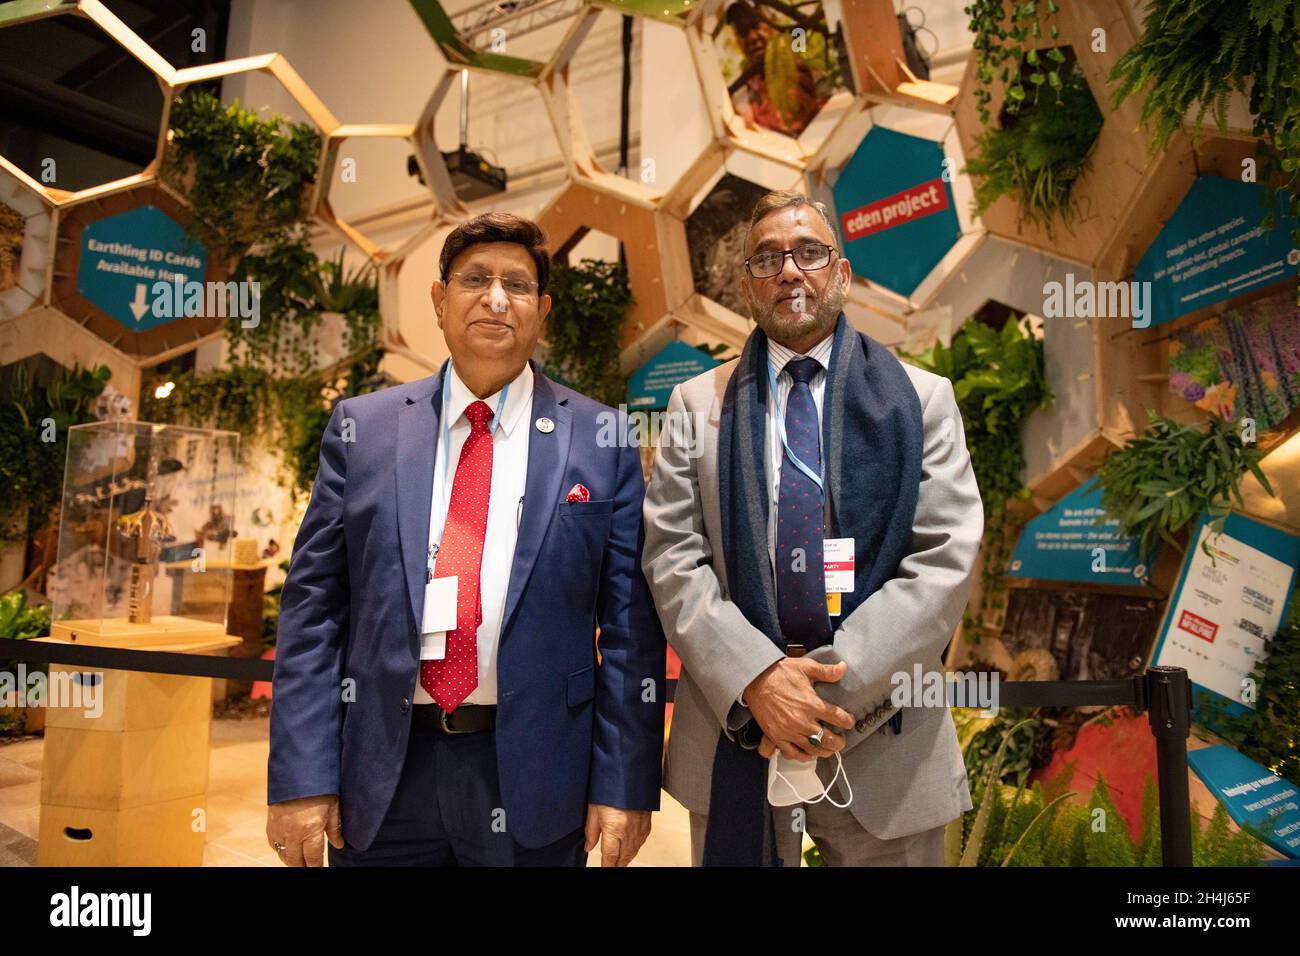 Glasgow, Scotland, UK. 2 November 2021 PICTURED: (left) Md Shahab Uddin MP, Cabinet Minister of Environment, Forest & Climate Change; (right), Abul Kalam Abdul Momen, Foreign Cabinet Minister of Peoples’s Republic of Bangladesh, People’s Republic of Bangladesh, seen at COP26. Credit: Colin Fisher Stock Photo